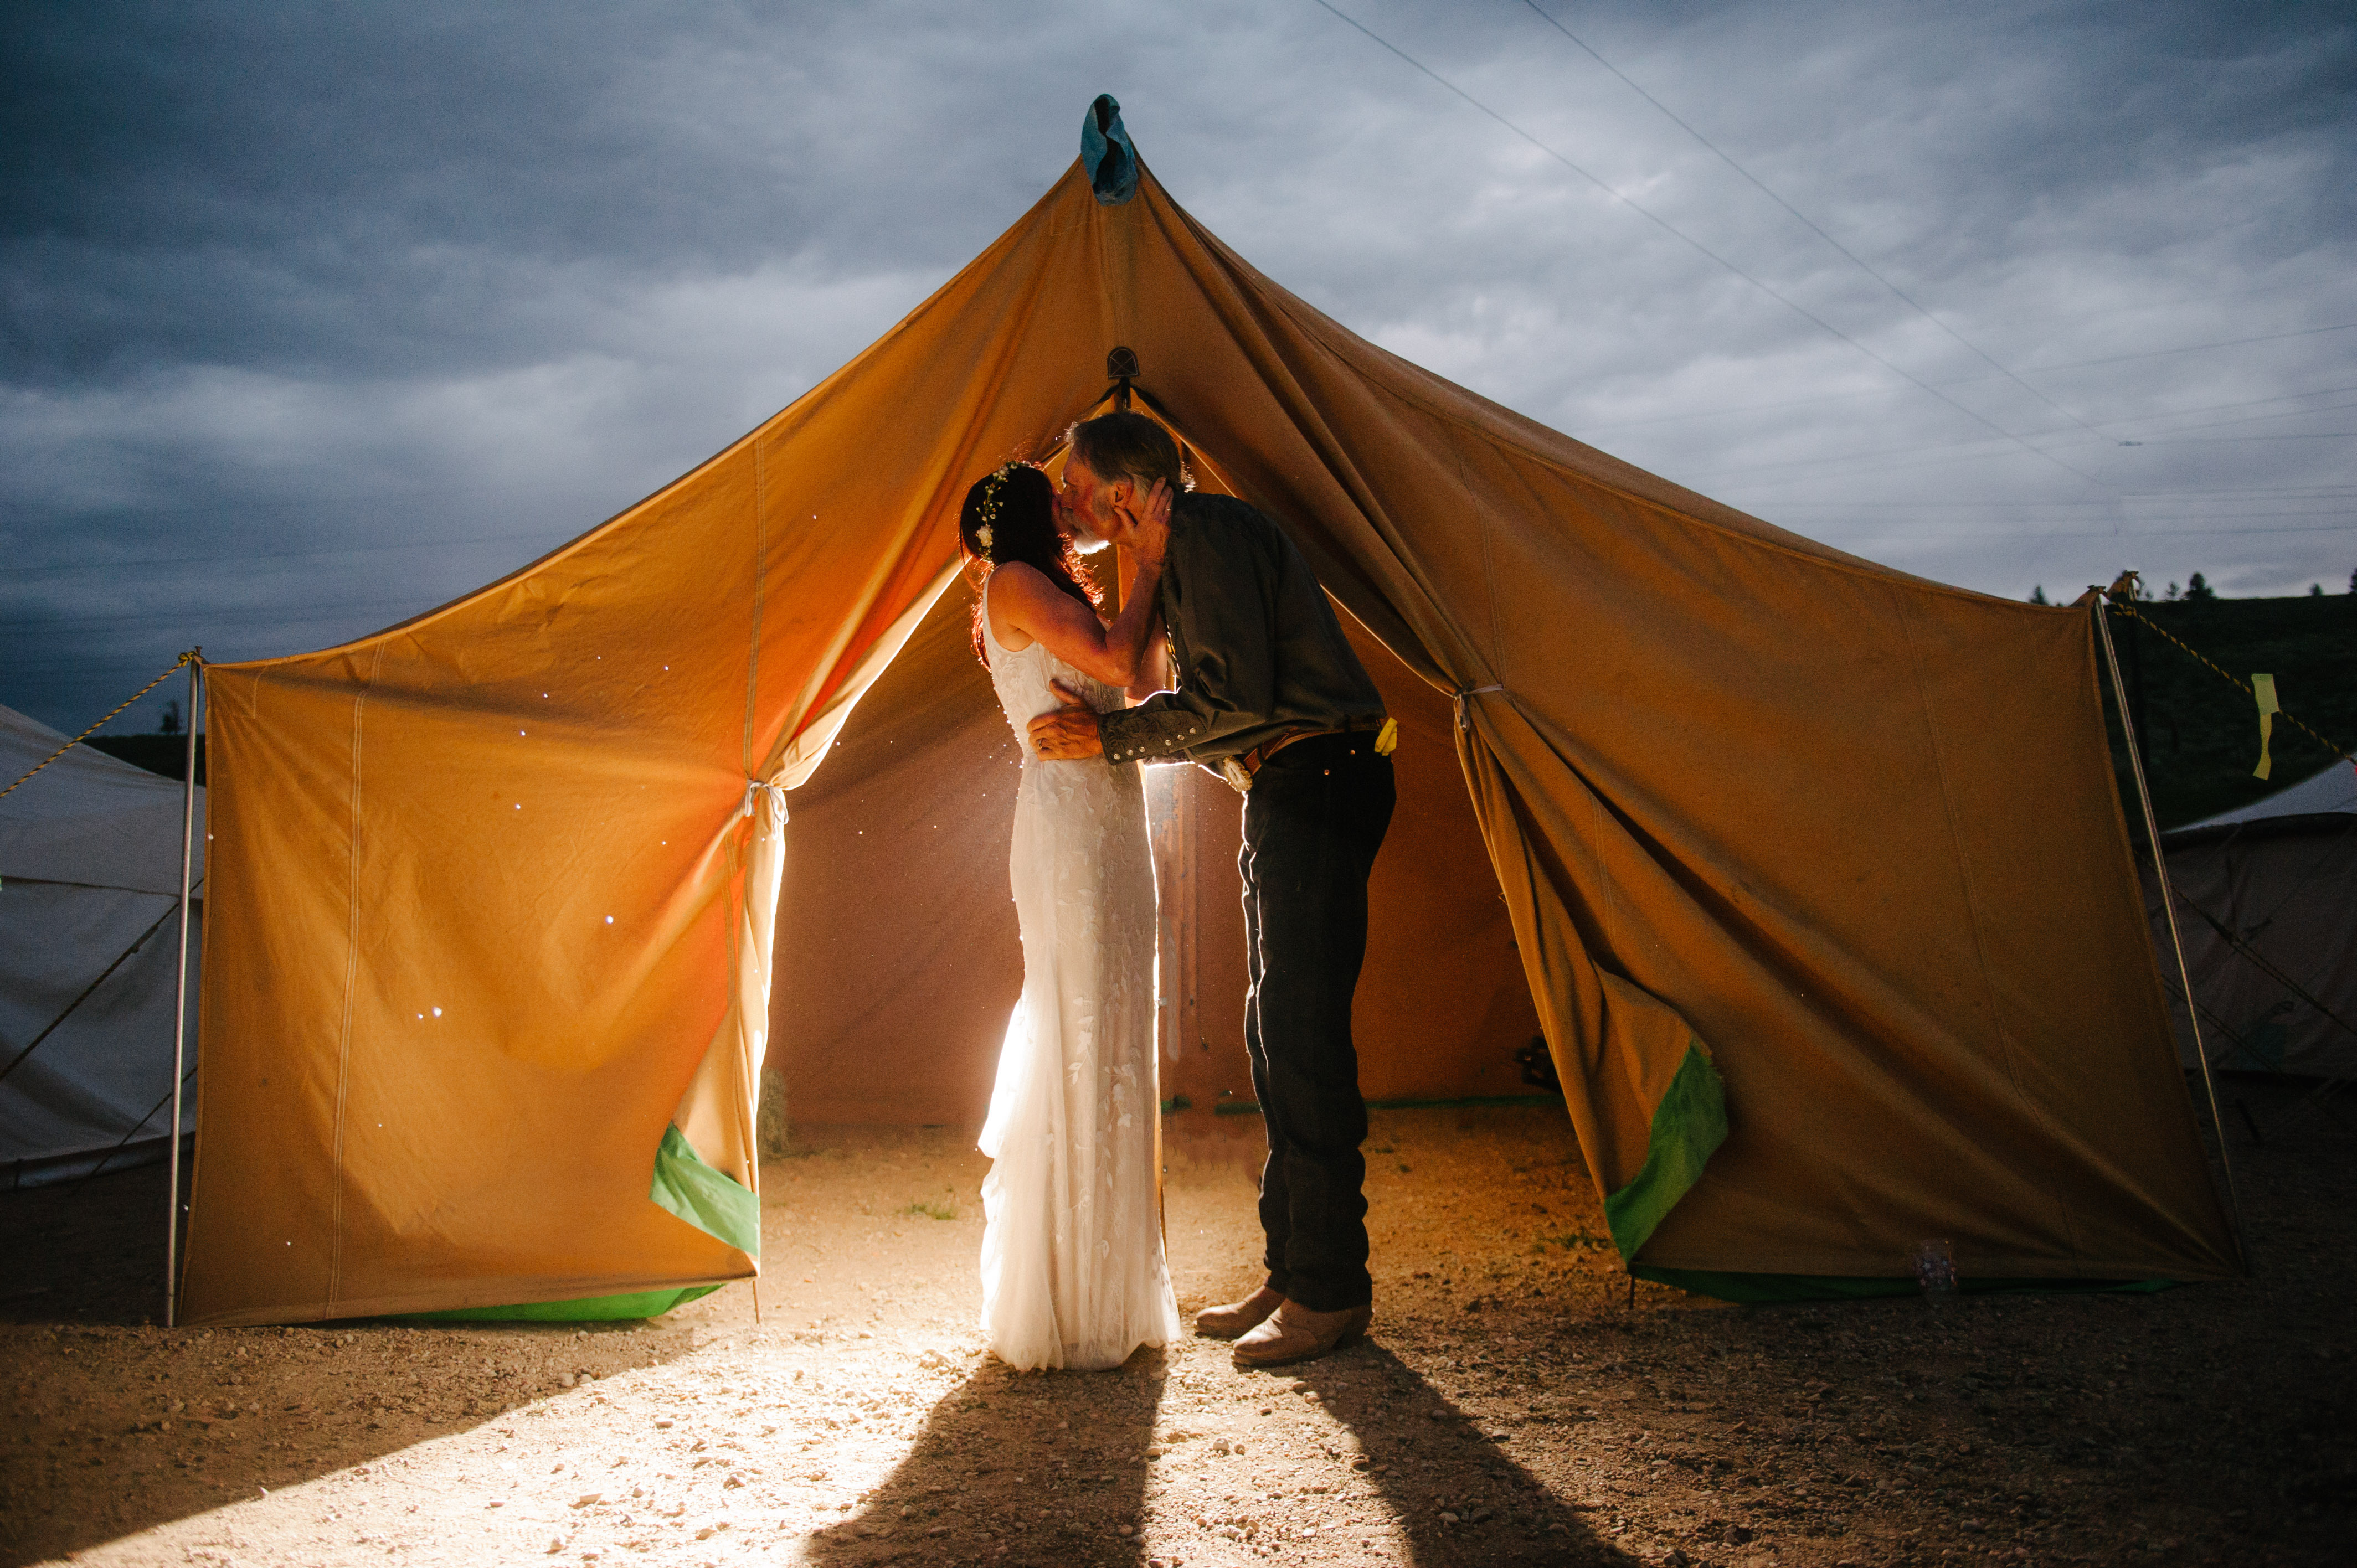 wedding photograph taken at dusk of a bride and groom kissing in front of a small tent that is illuminated by a flash coming from within